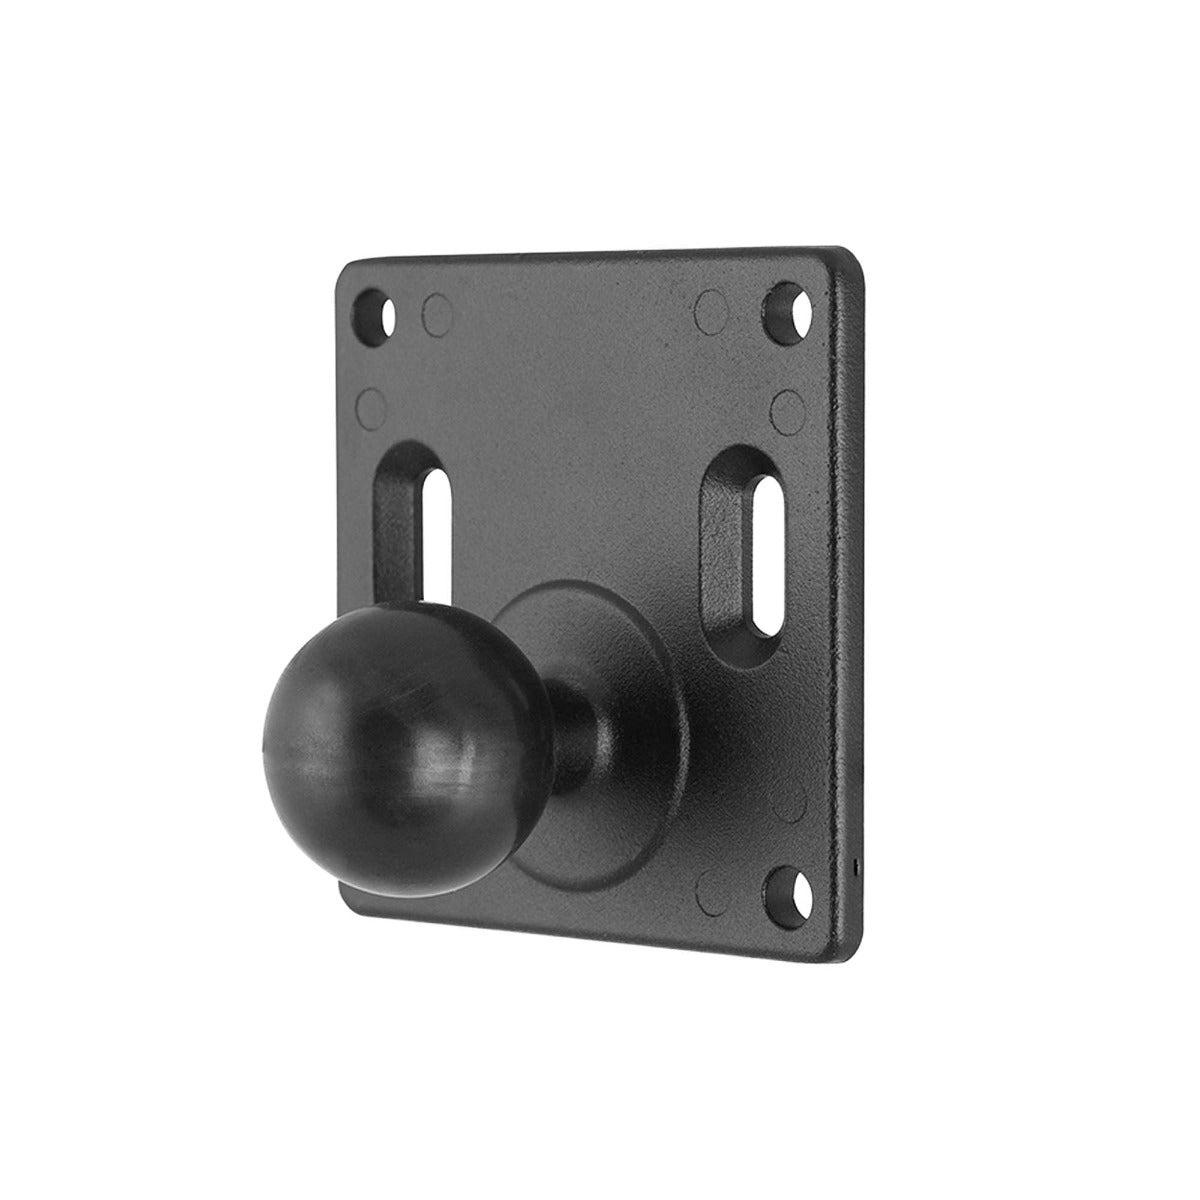 iBOLT™ 38mm / 1.5 inch to VESA 75 x 75 Ball Adapter for monitors, displays, or tv’s